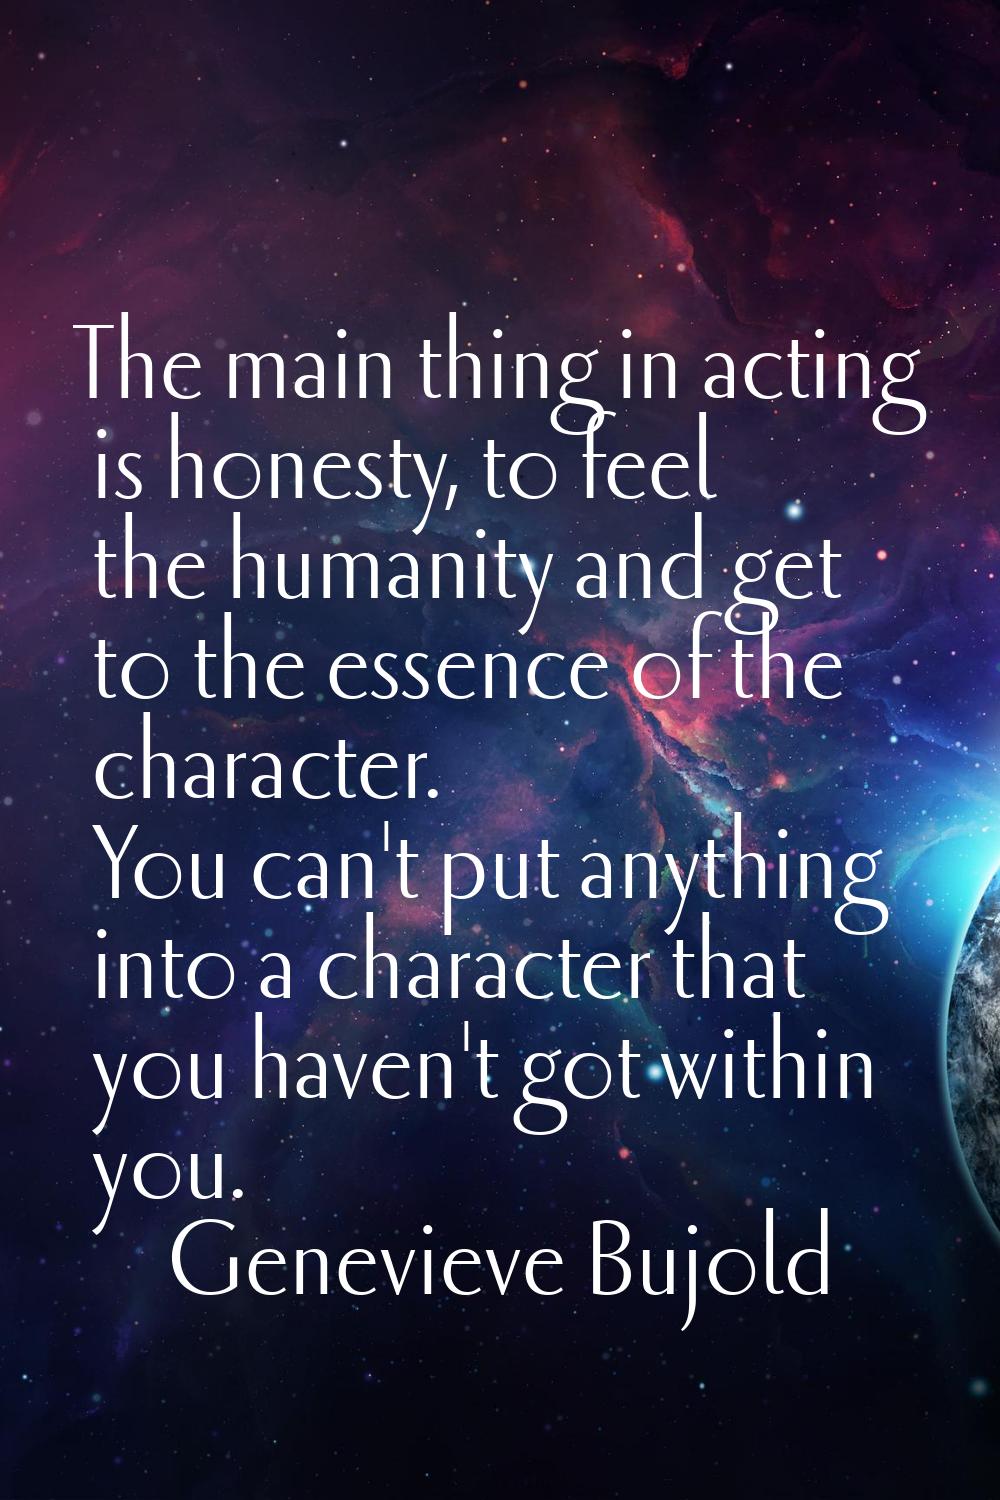 The main thing in acting is honesty, to feel the humanity and get to the essence of the character. 